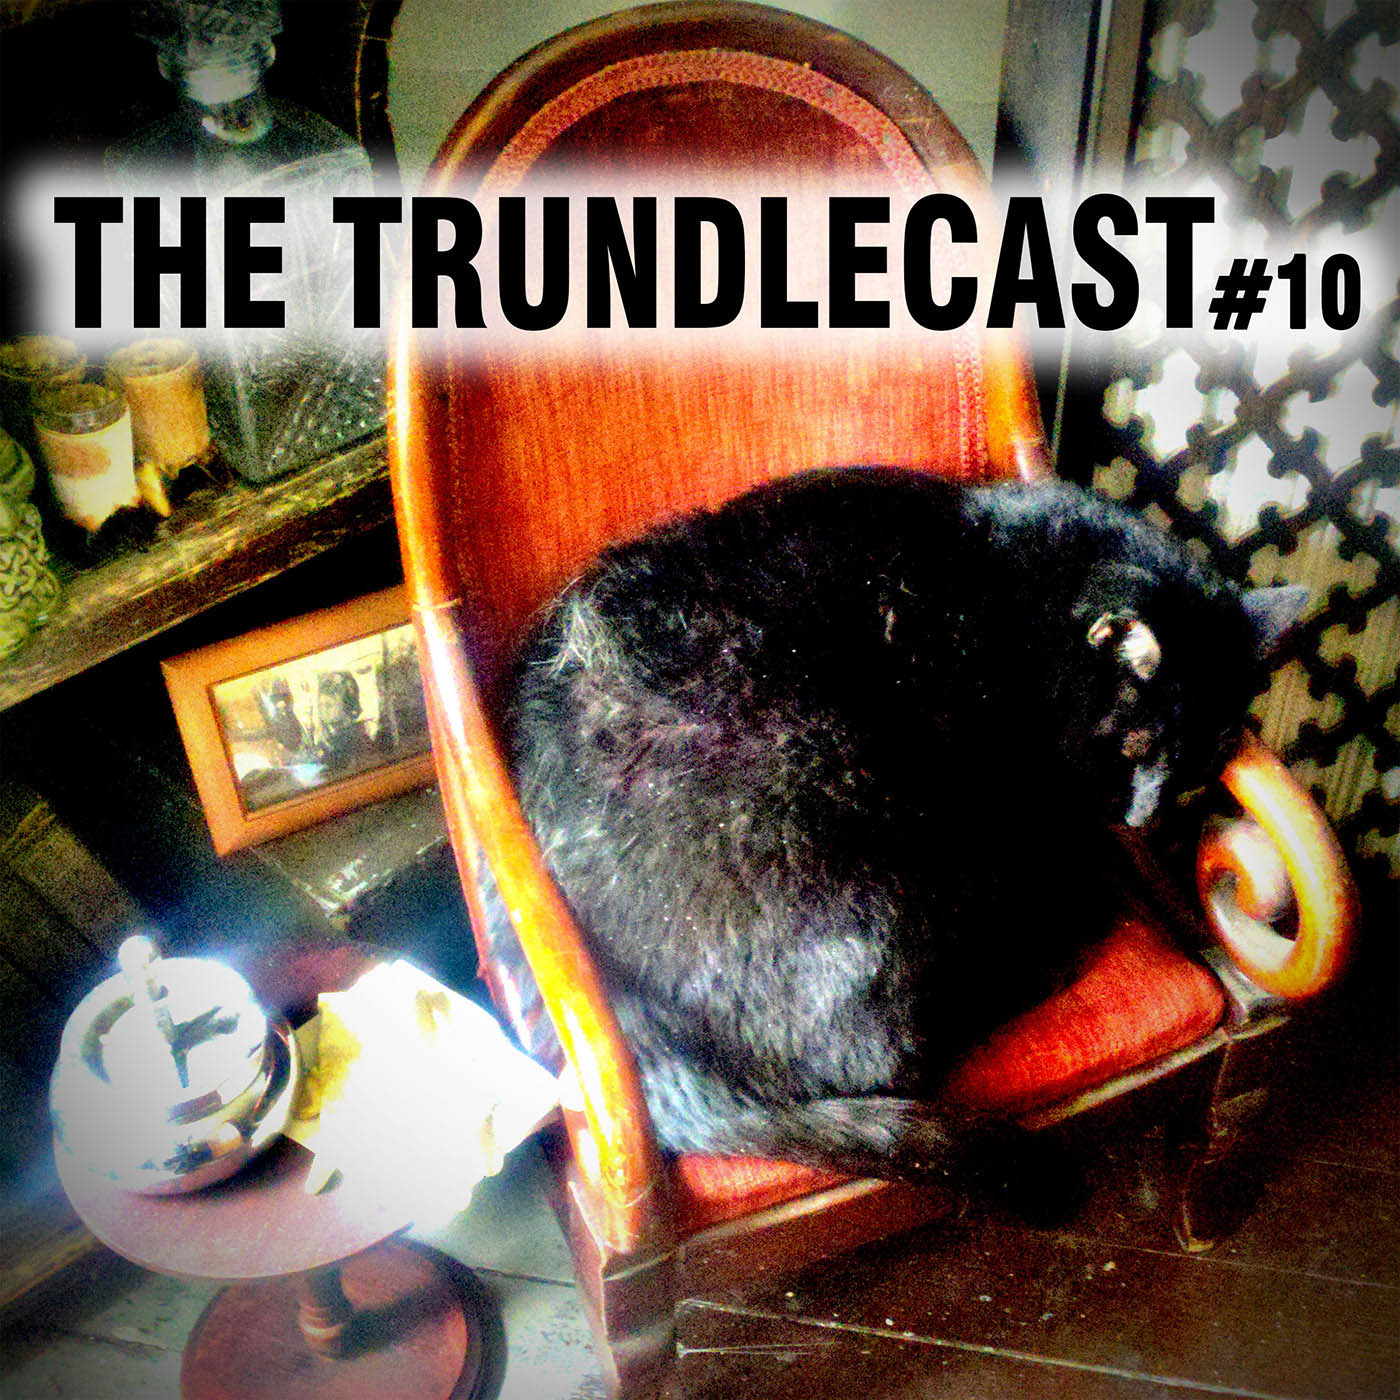 The 10th Trundlecast!